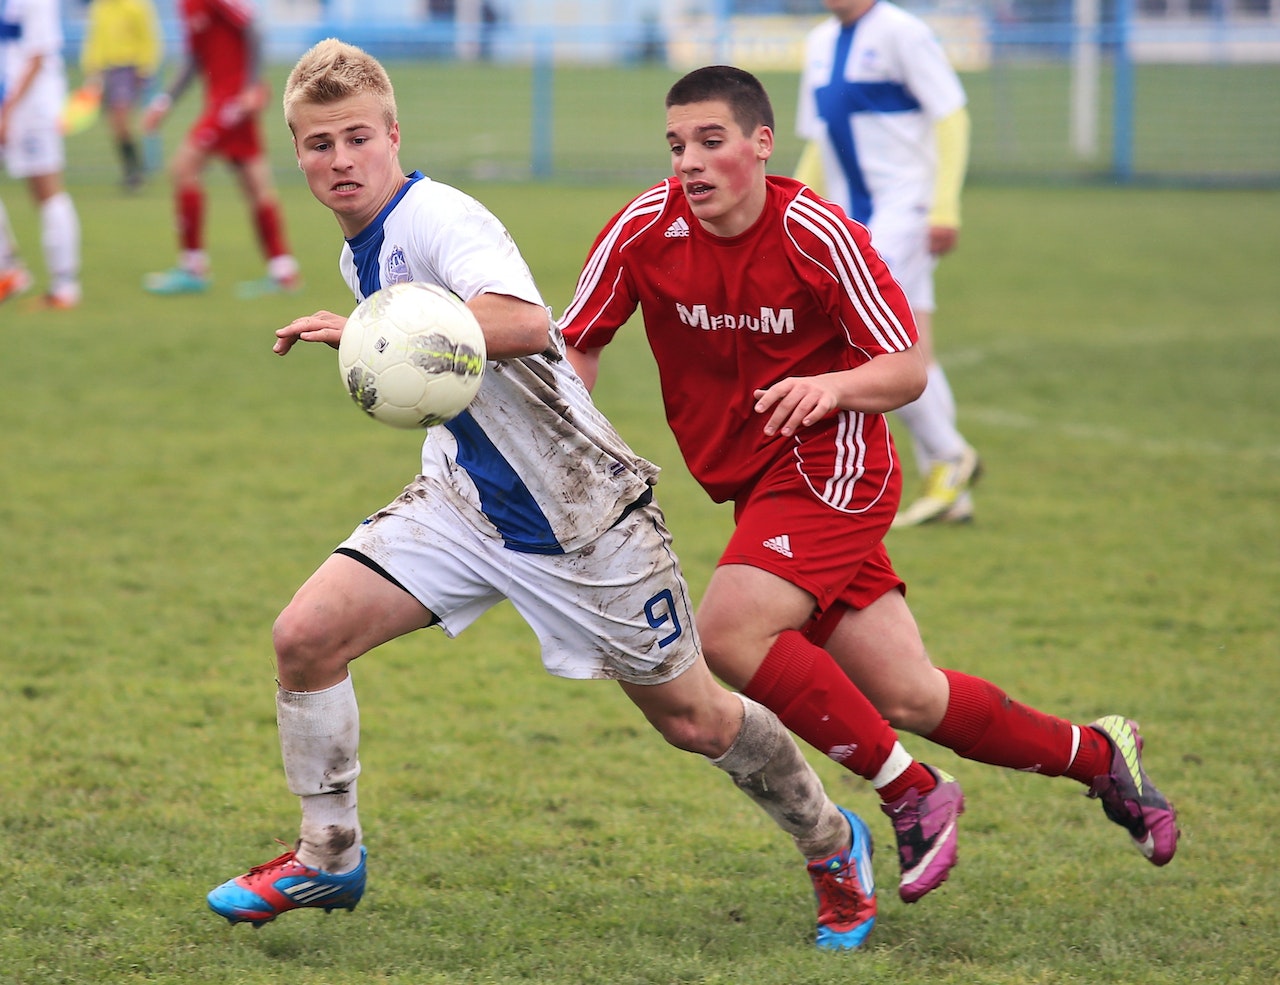 Get a sports physical before playing youth soccer in Reno